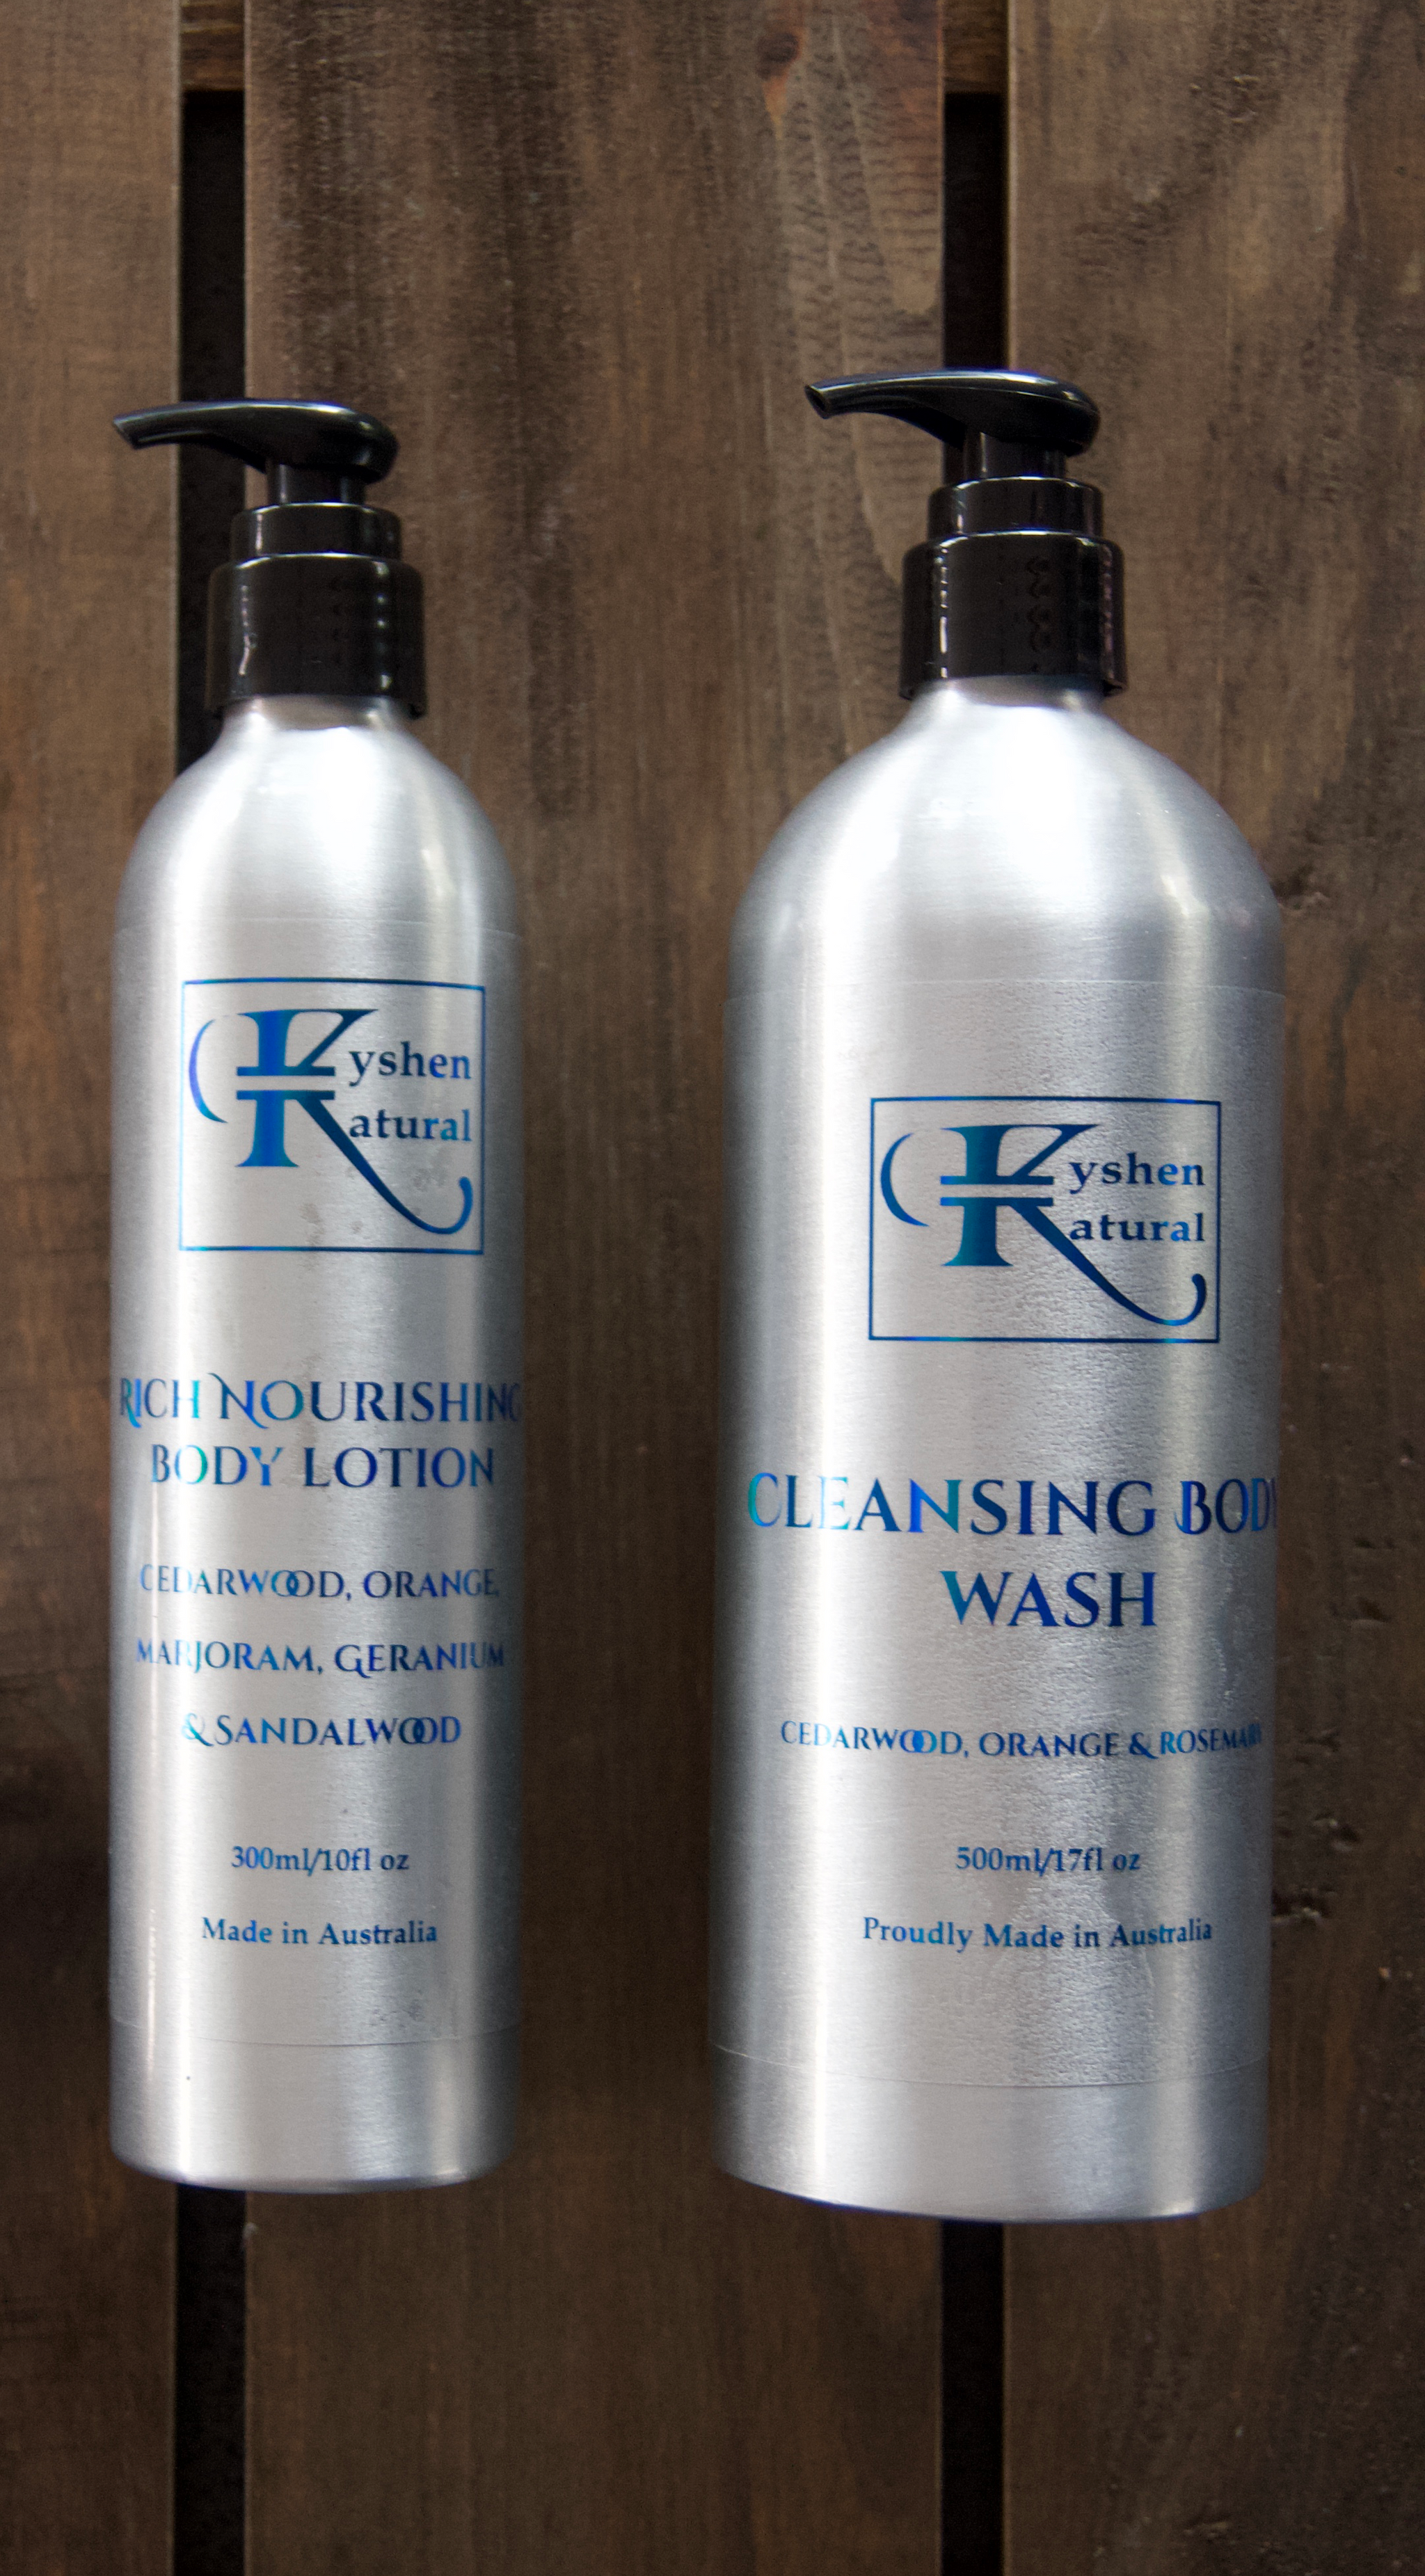 Men's Rich Nourishing Body Lotion and Cleansing Body Wash